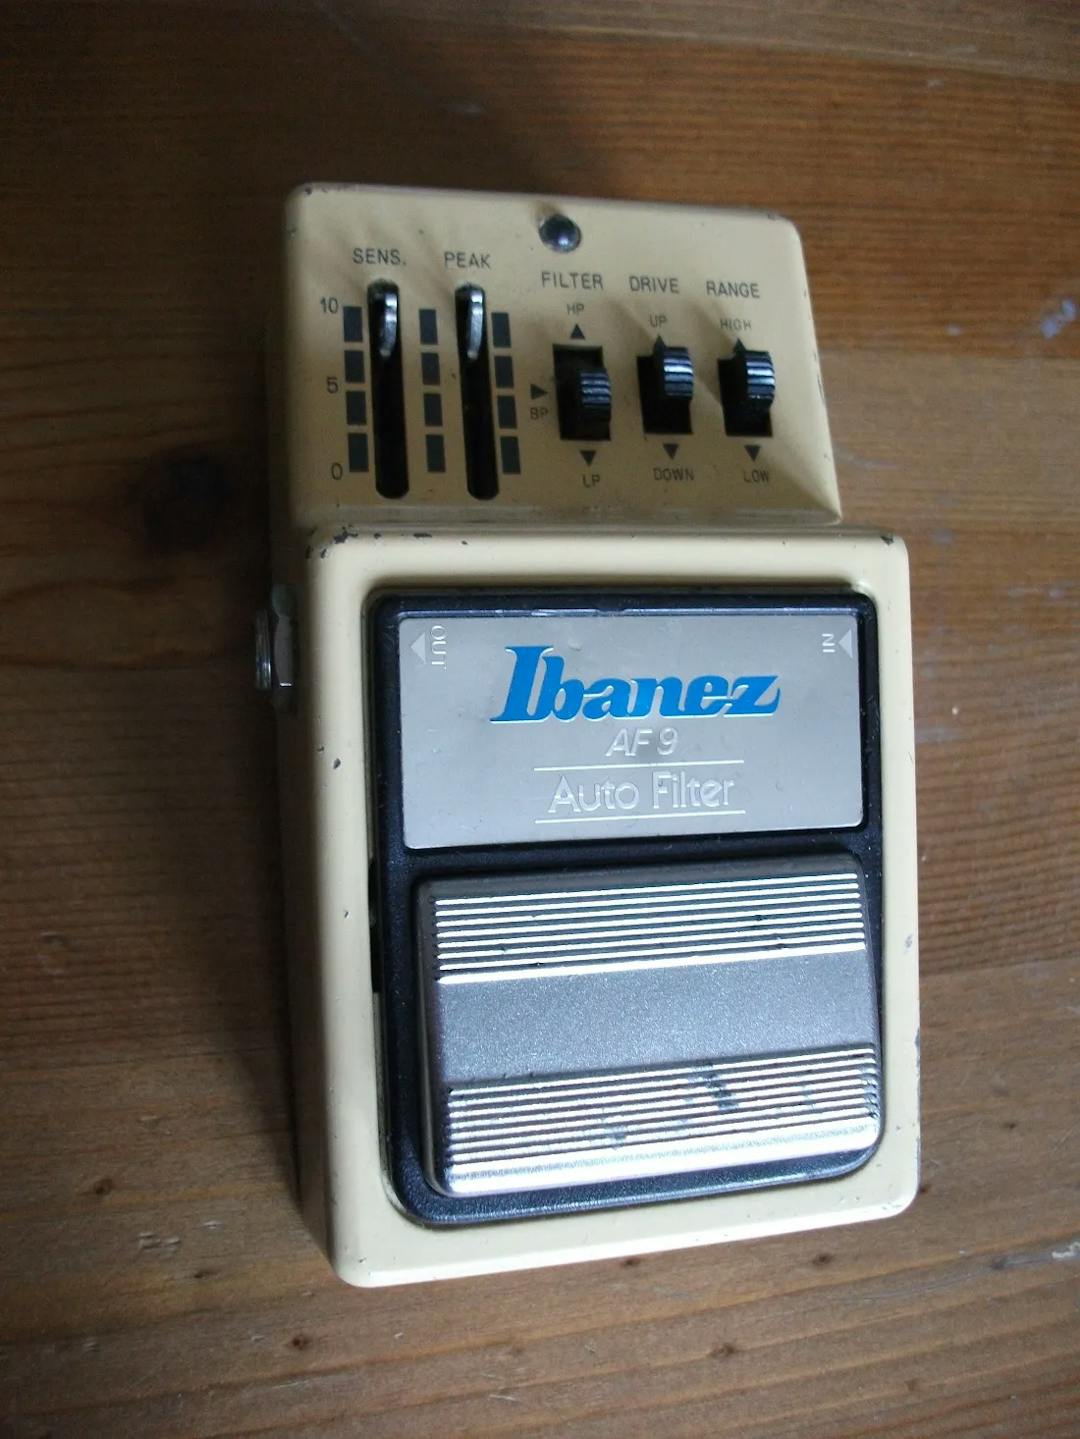 AF9 Auto Filter Guitar Pedal By Ibanez